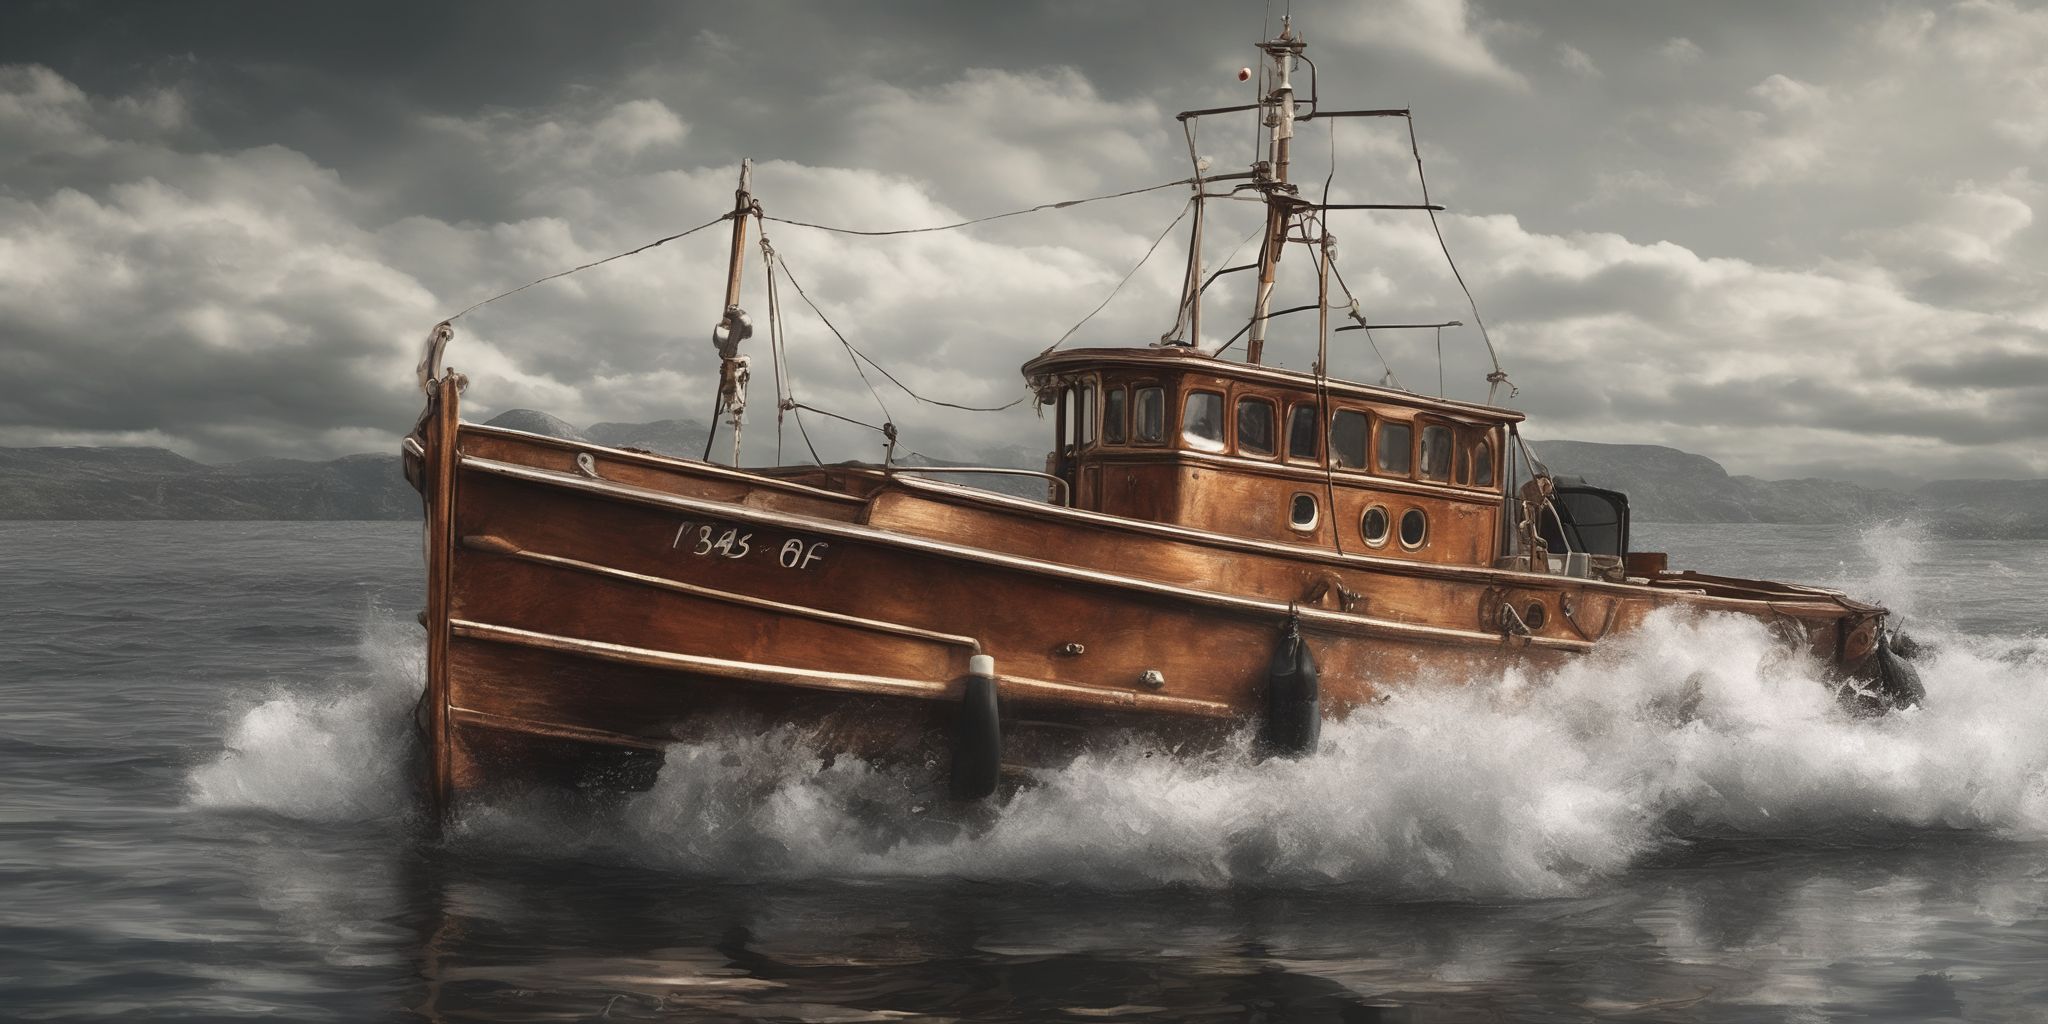 Interest boat  in realistic, photographic style